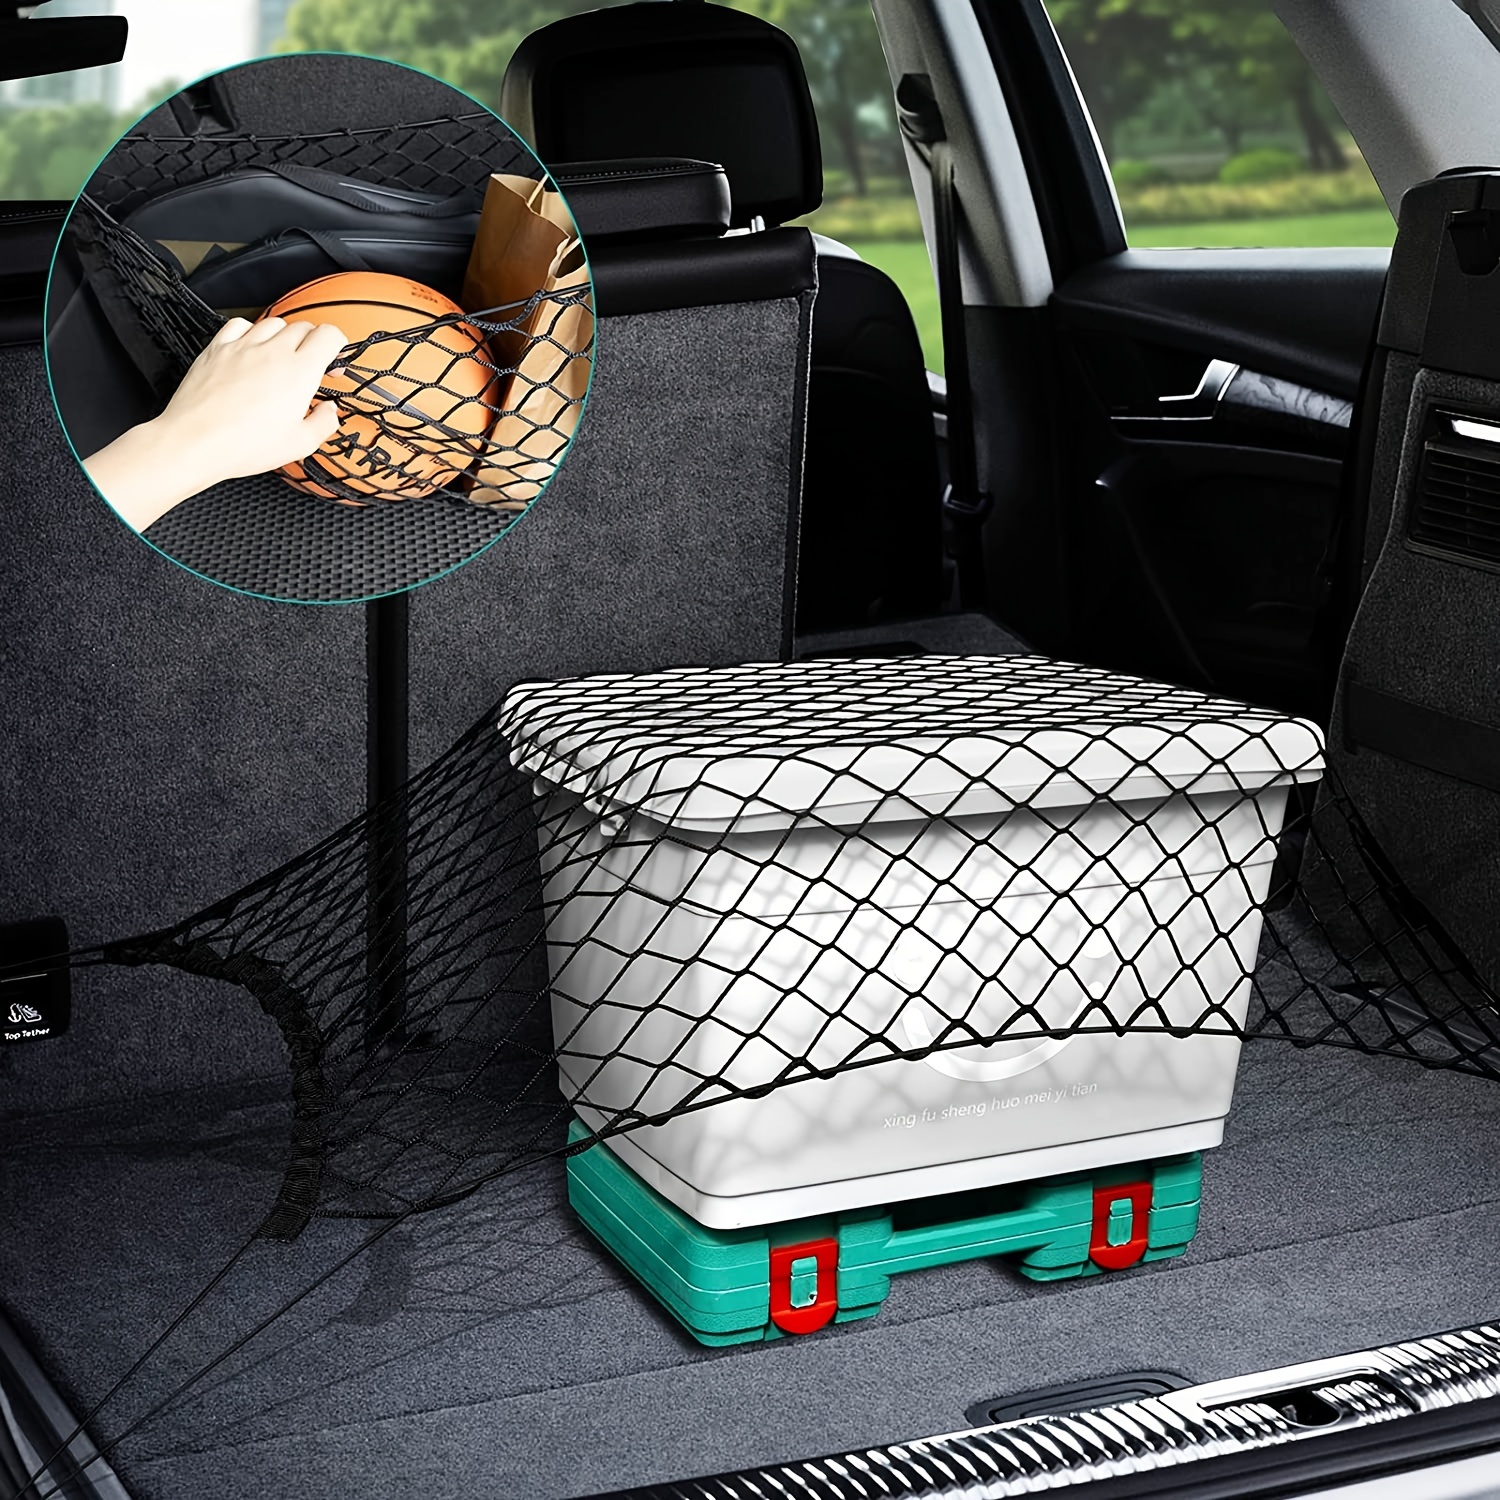 AutoNet Car Mesh Trunk Organizer For Storage, Auto Positioning, And Travel  Portable Mesh Pocket For Luggage And Cars. From Blake Online, $3.88